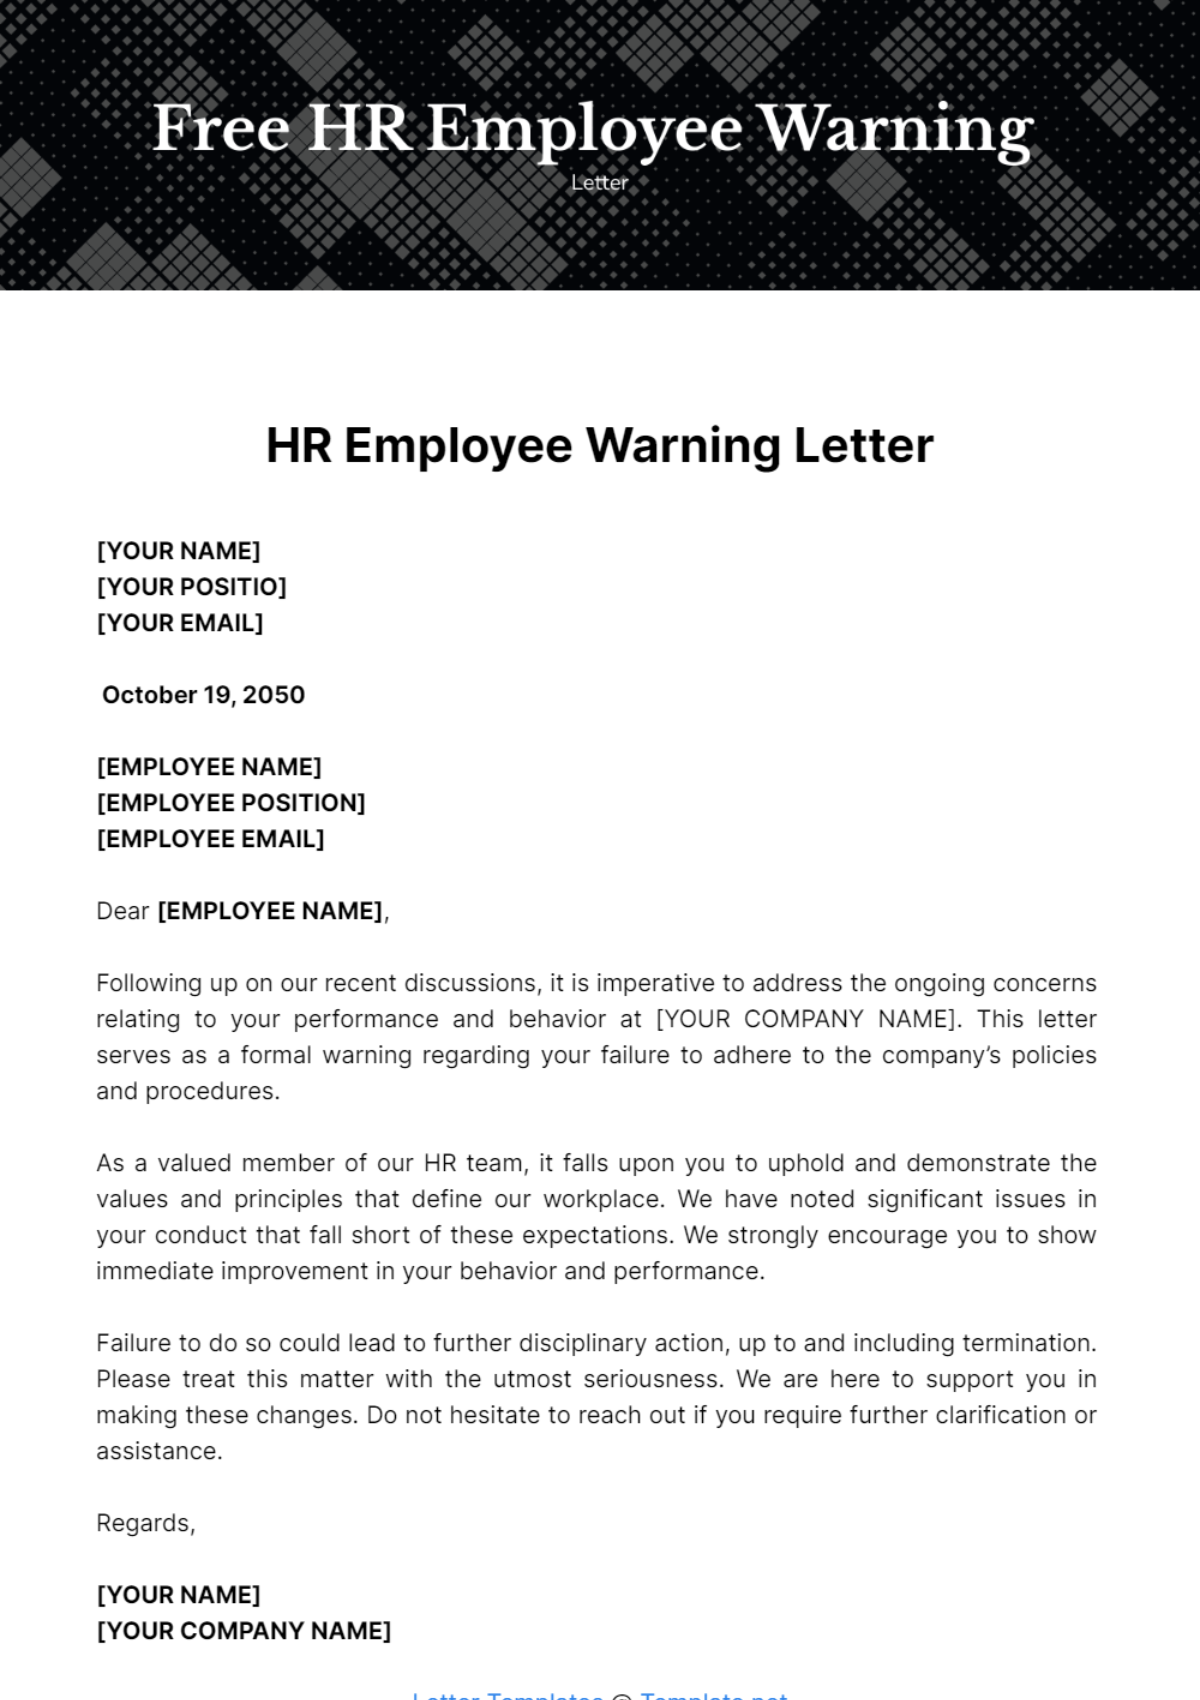 Free HR Employee Warning Letter Template